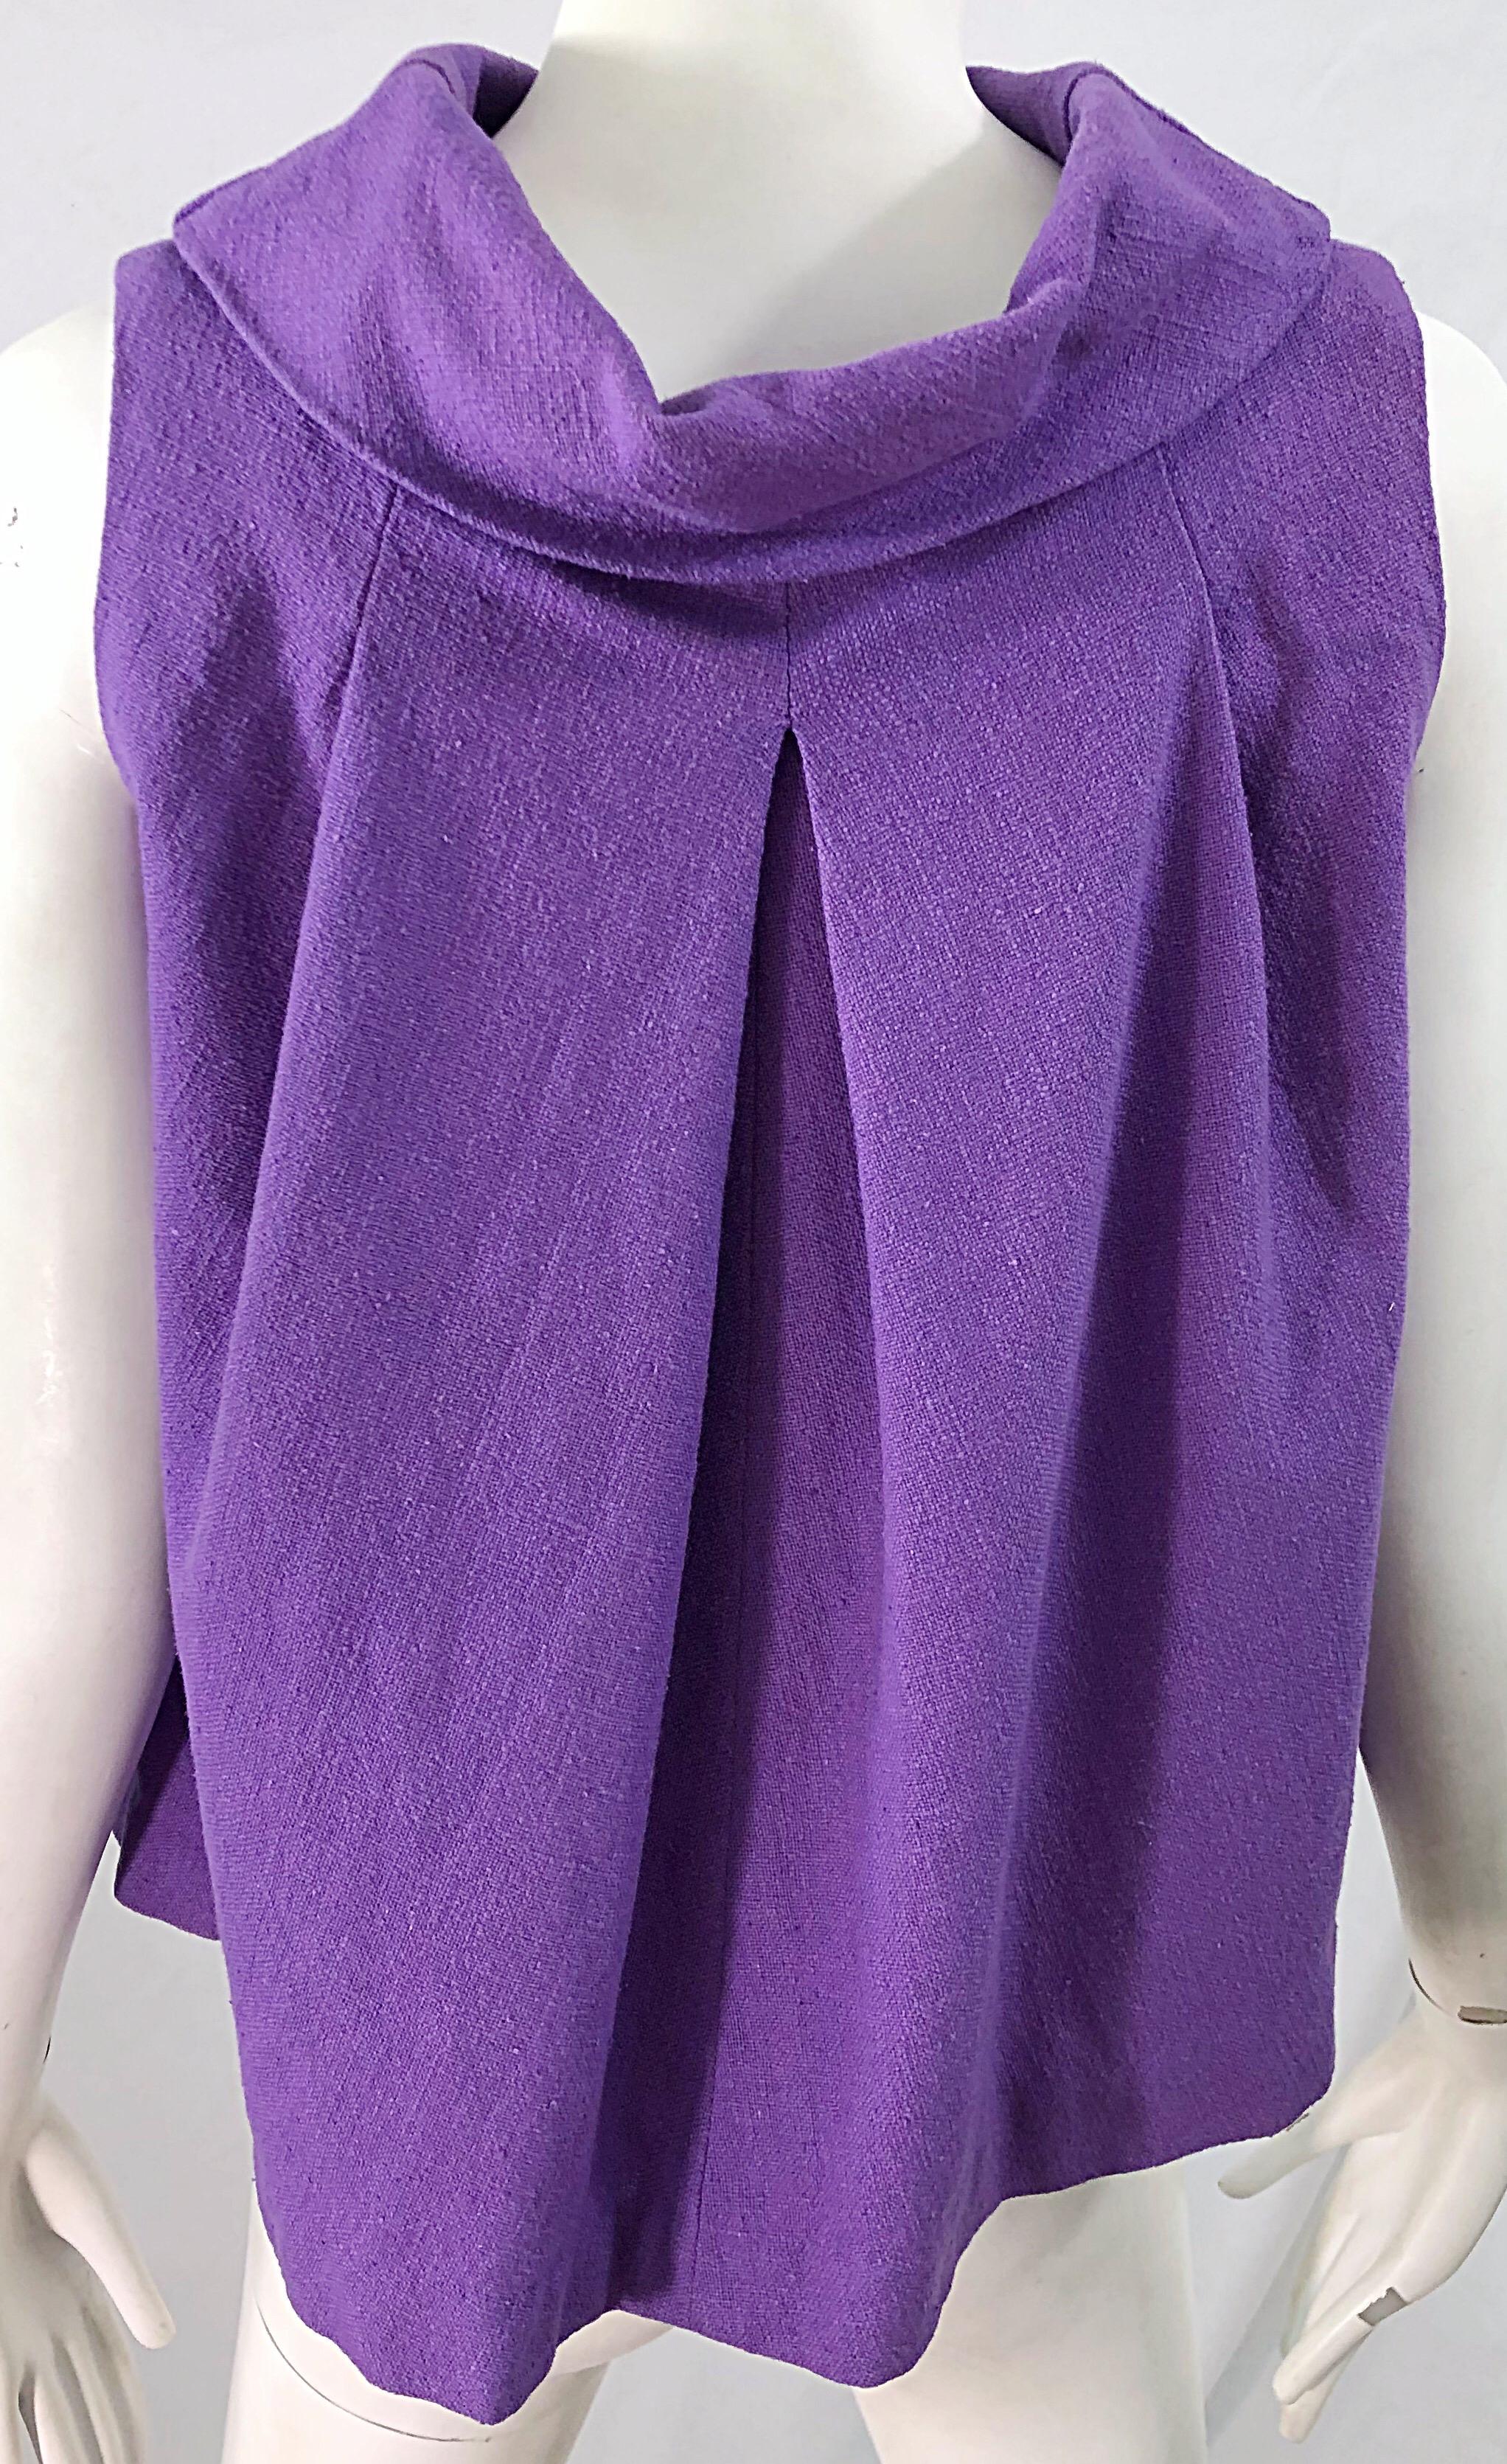 Chic 1960s Purple Linen Empire Waist Vintage 60s A Line Sleeveless Top Shirt In Excellent Condition For Sale In San Diego, CA